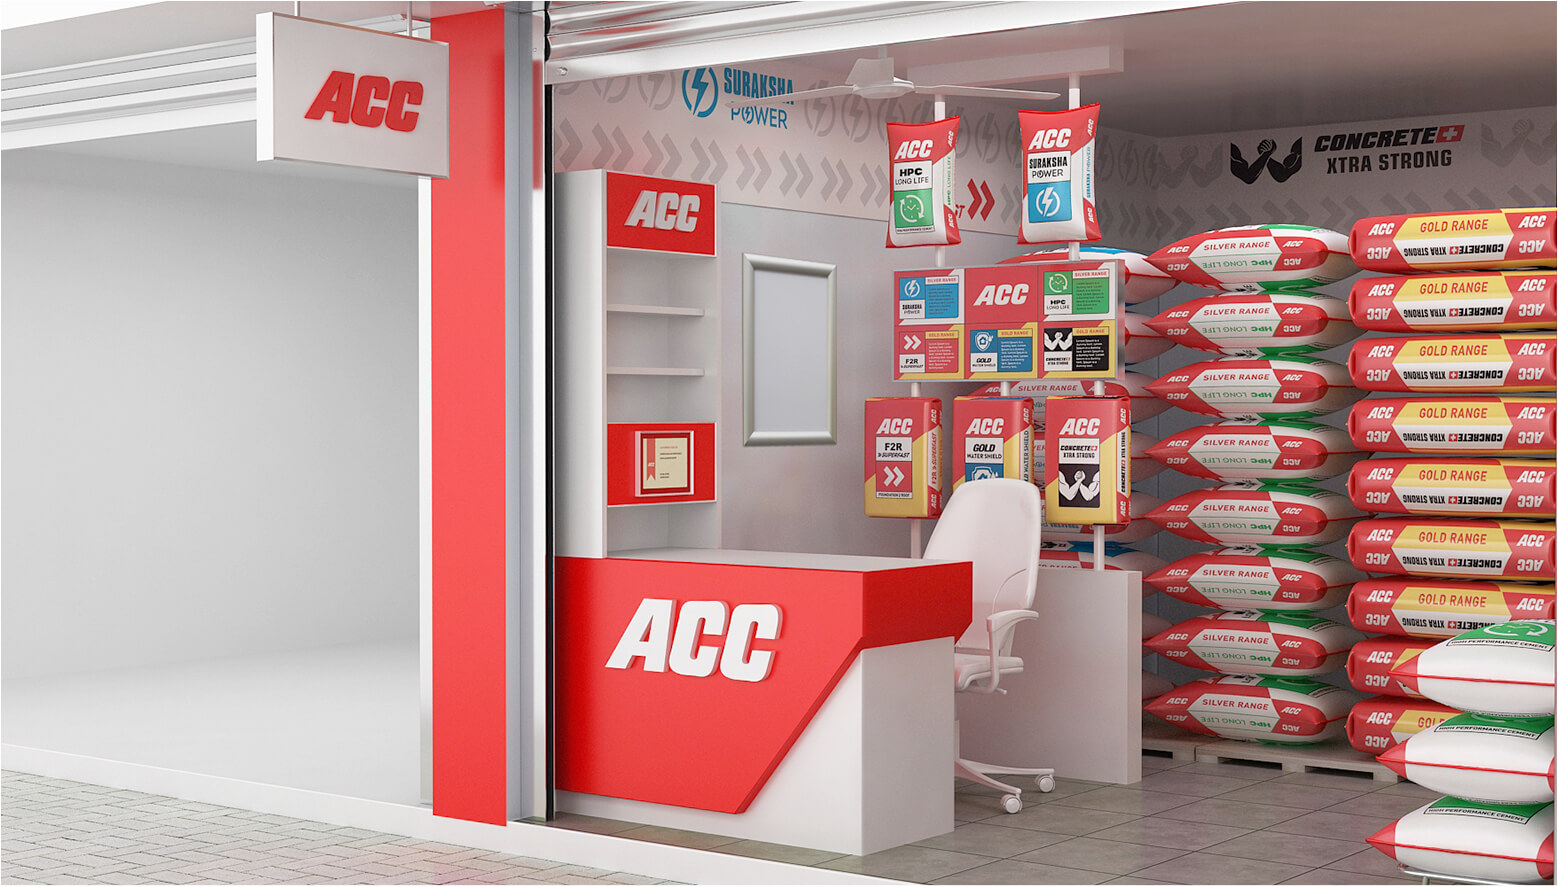 ACC Cement Case Study (Packaging) DY Works | Packaging Case Strudy